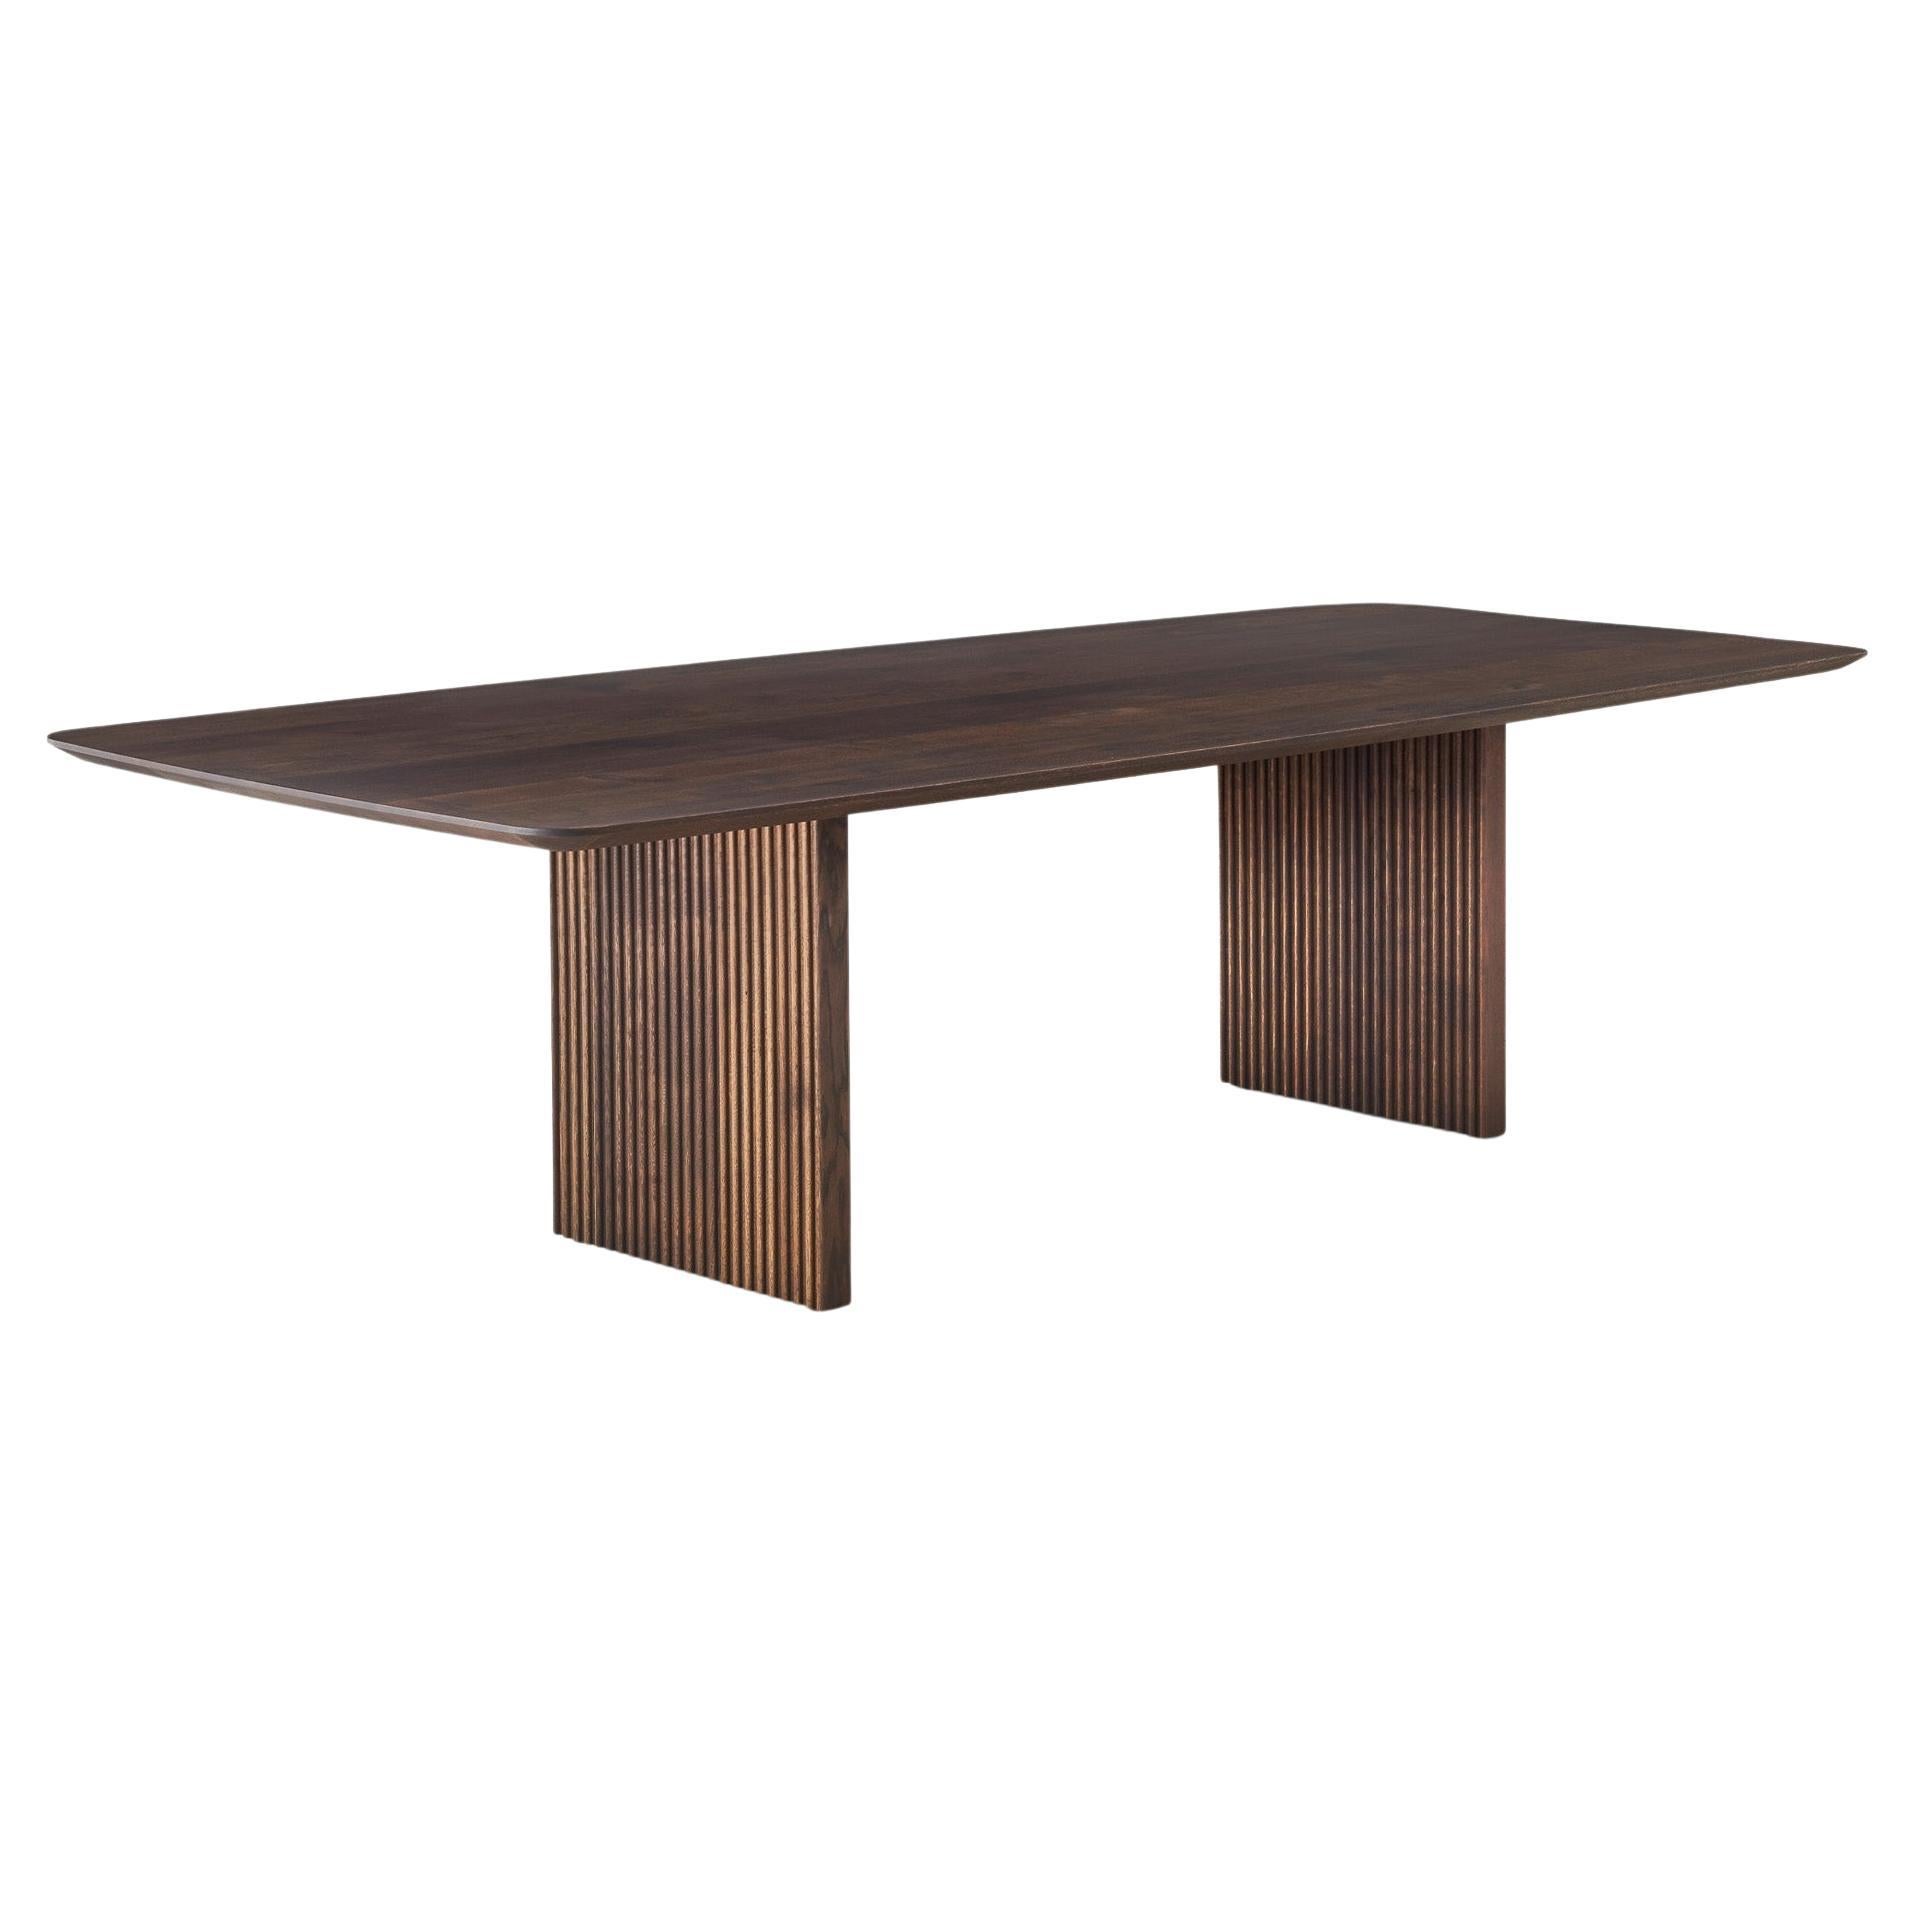 Customizable Dining Table TEN 240, Smoked Oak or Walnut For Sale at 1stDibs  | ten table, smoked oak dining table, ten dining table